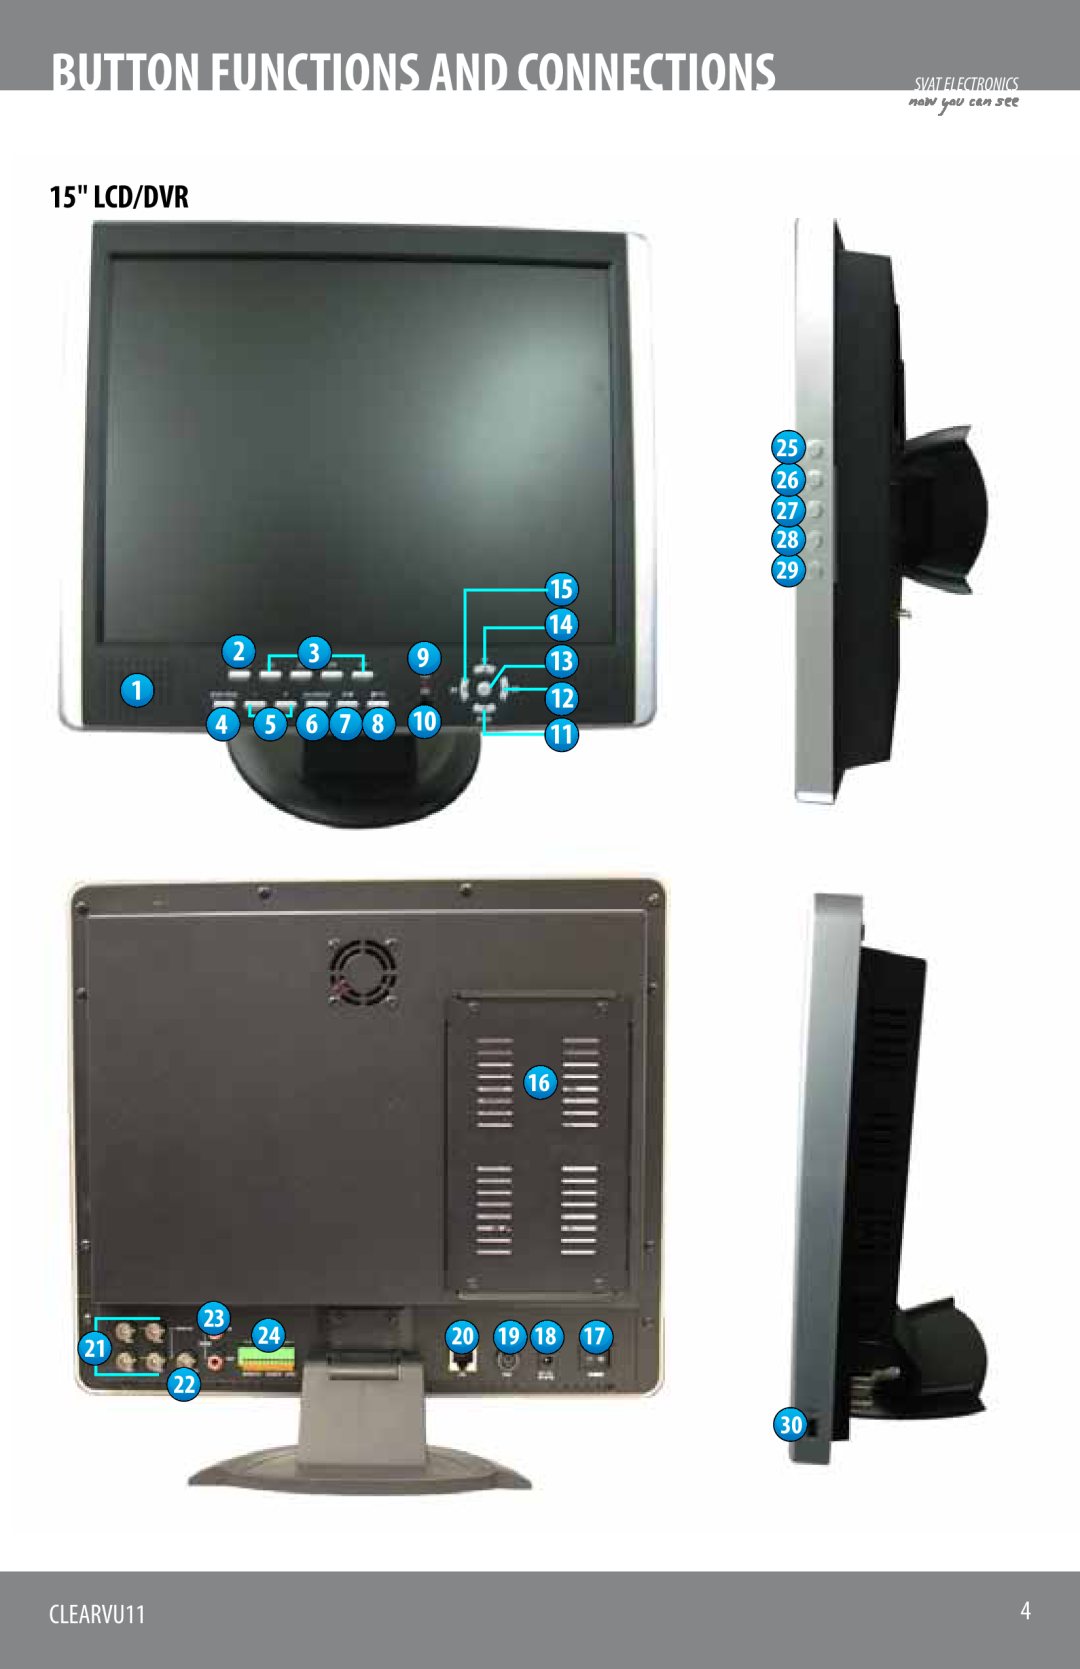 SVAT Electronics CLEARVU11 instruction manual 15 LCD/DVR, 2 1 4, 39 6 7 8, 15 14 13 12 11, now you can see, 25 26 27 28 